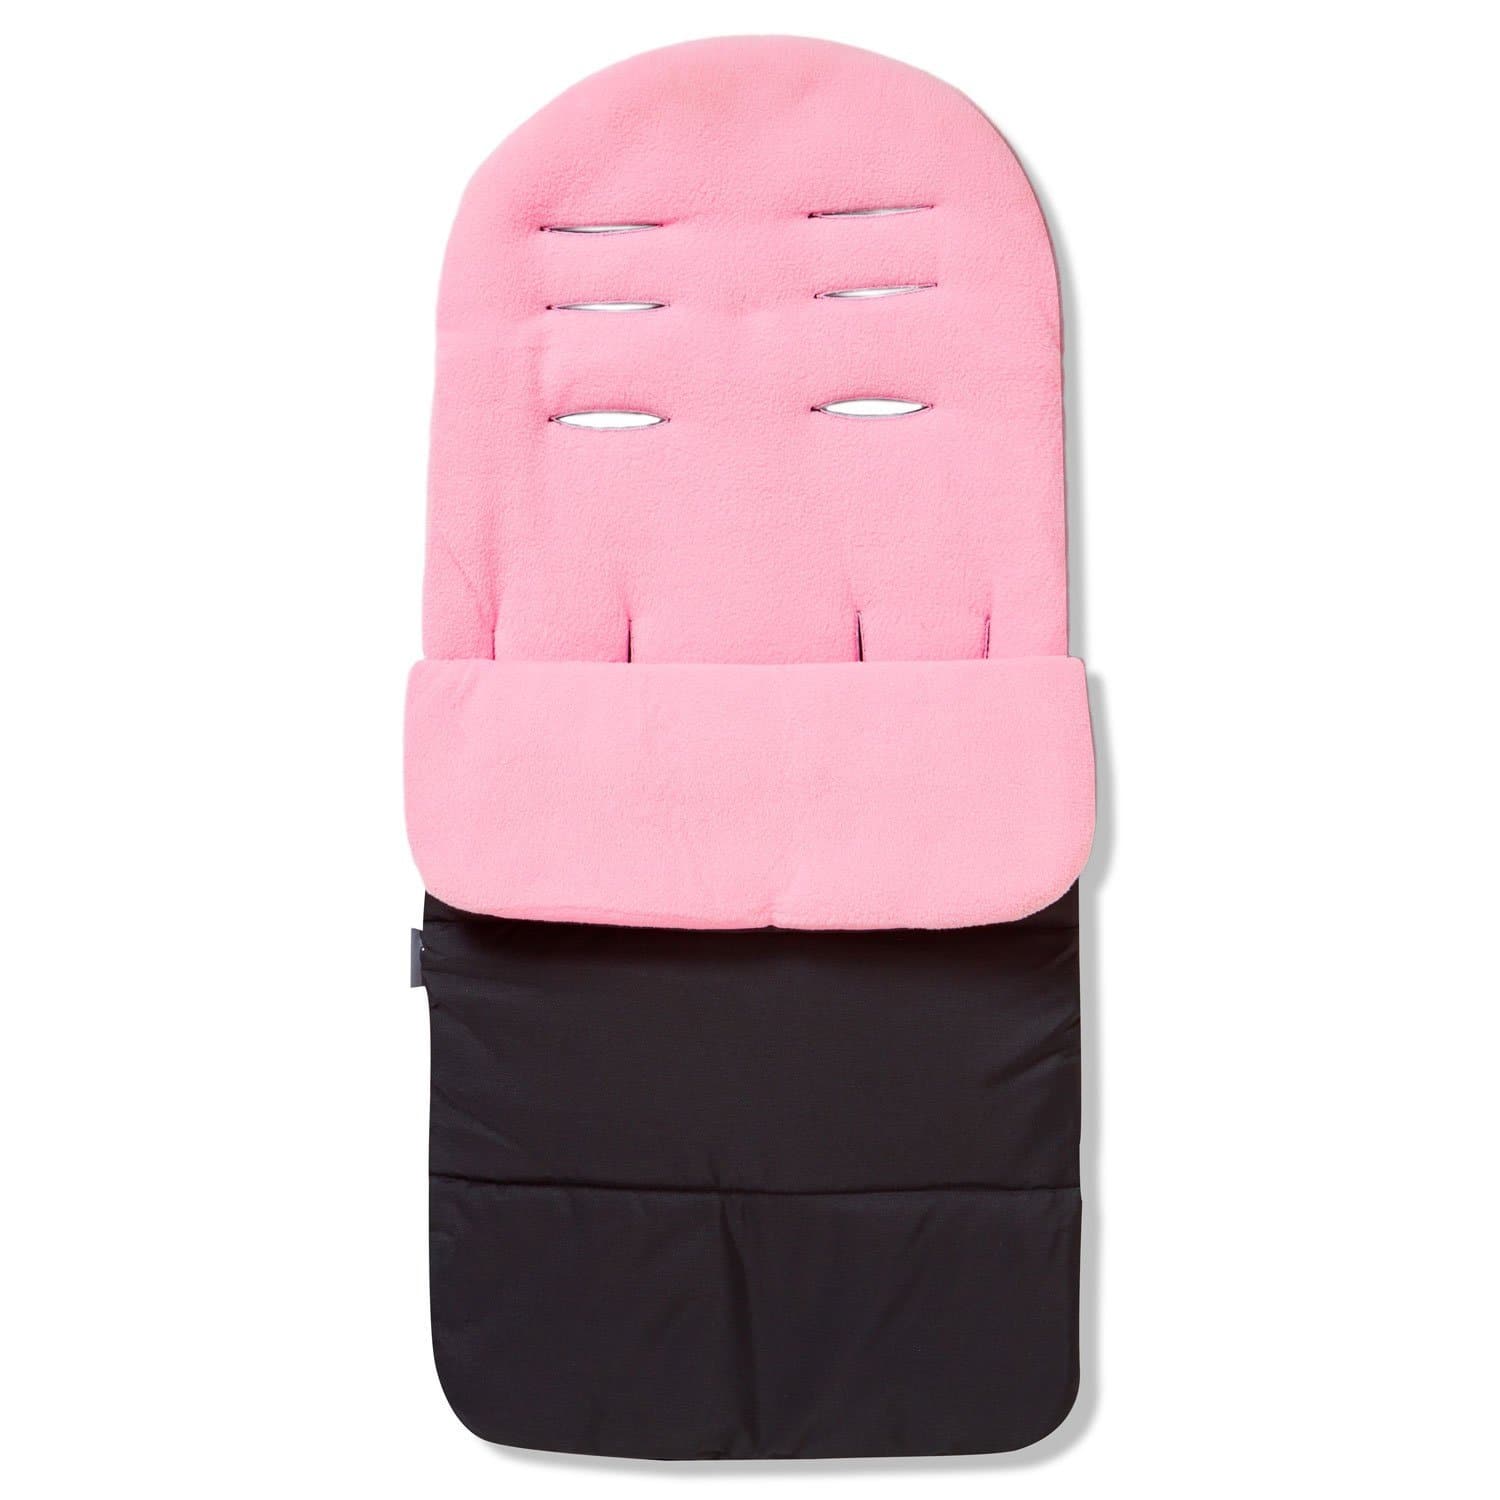 Premium Footmuff / Cosy Toes Compatible with Kiddicare - For Your Little One